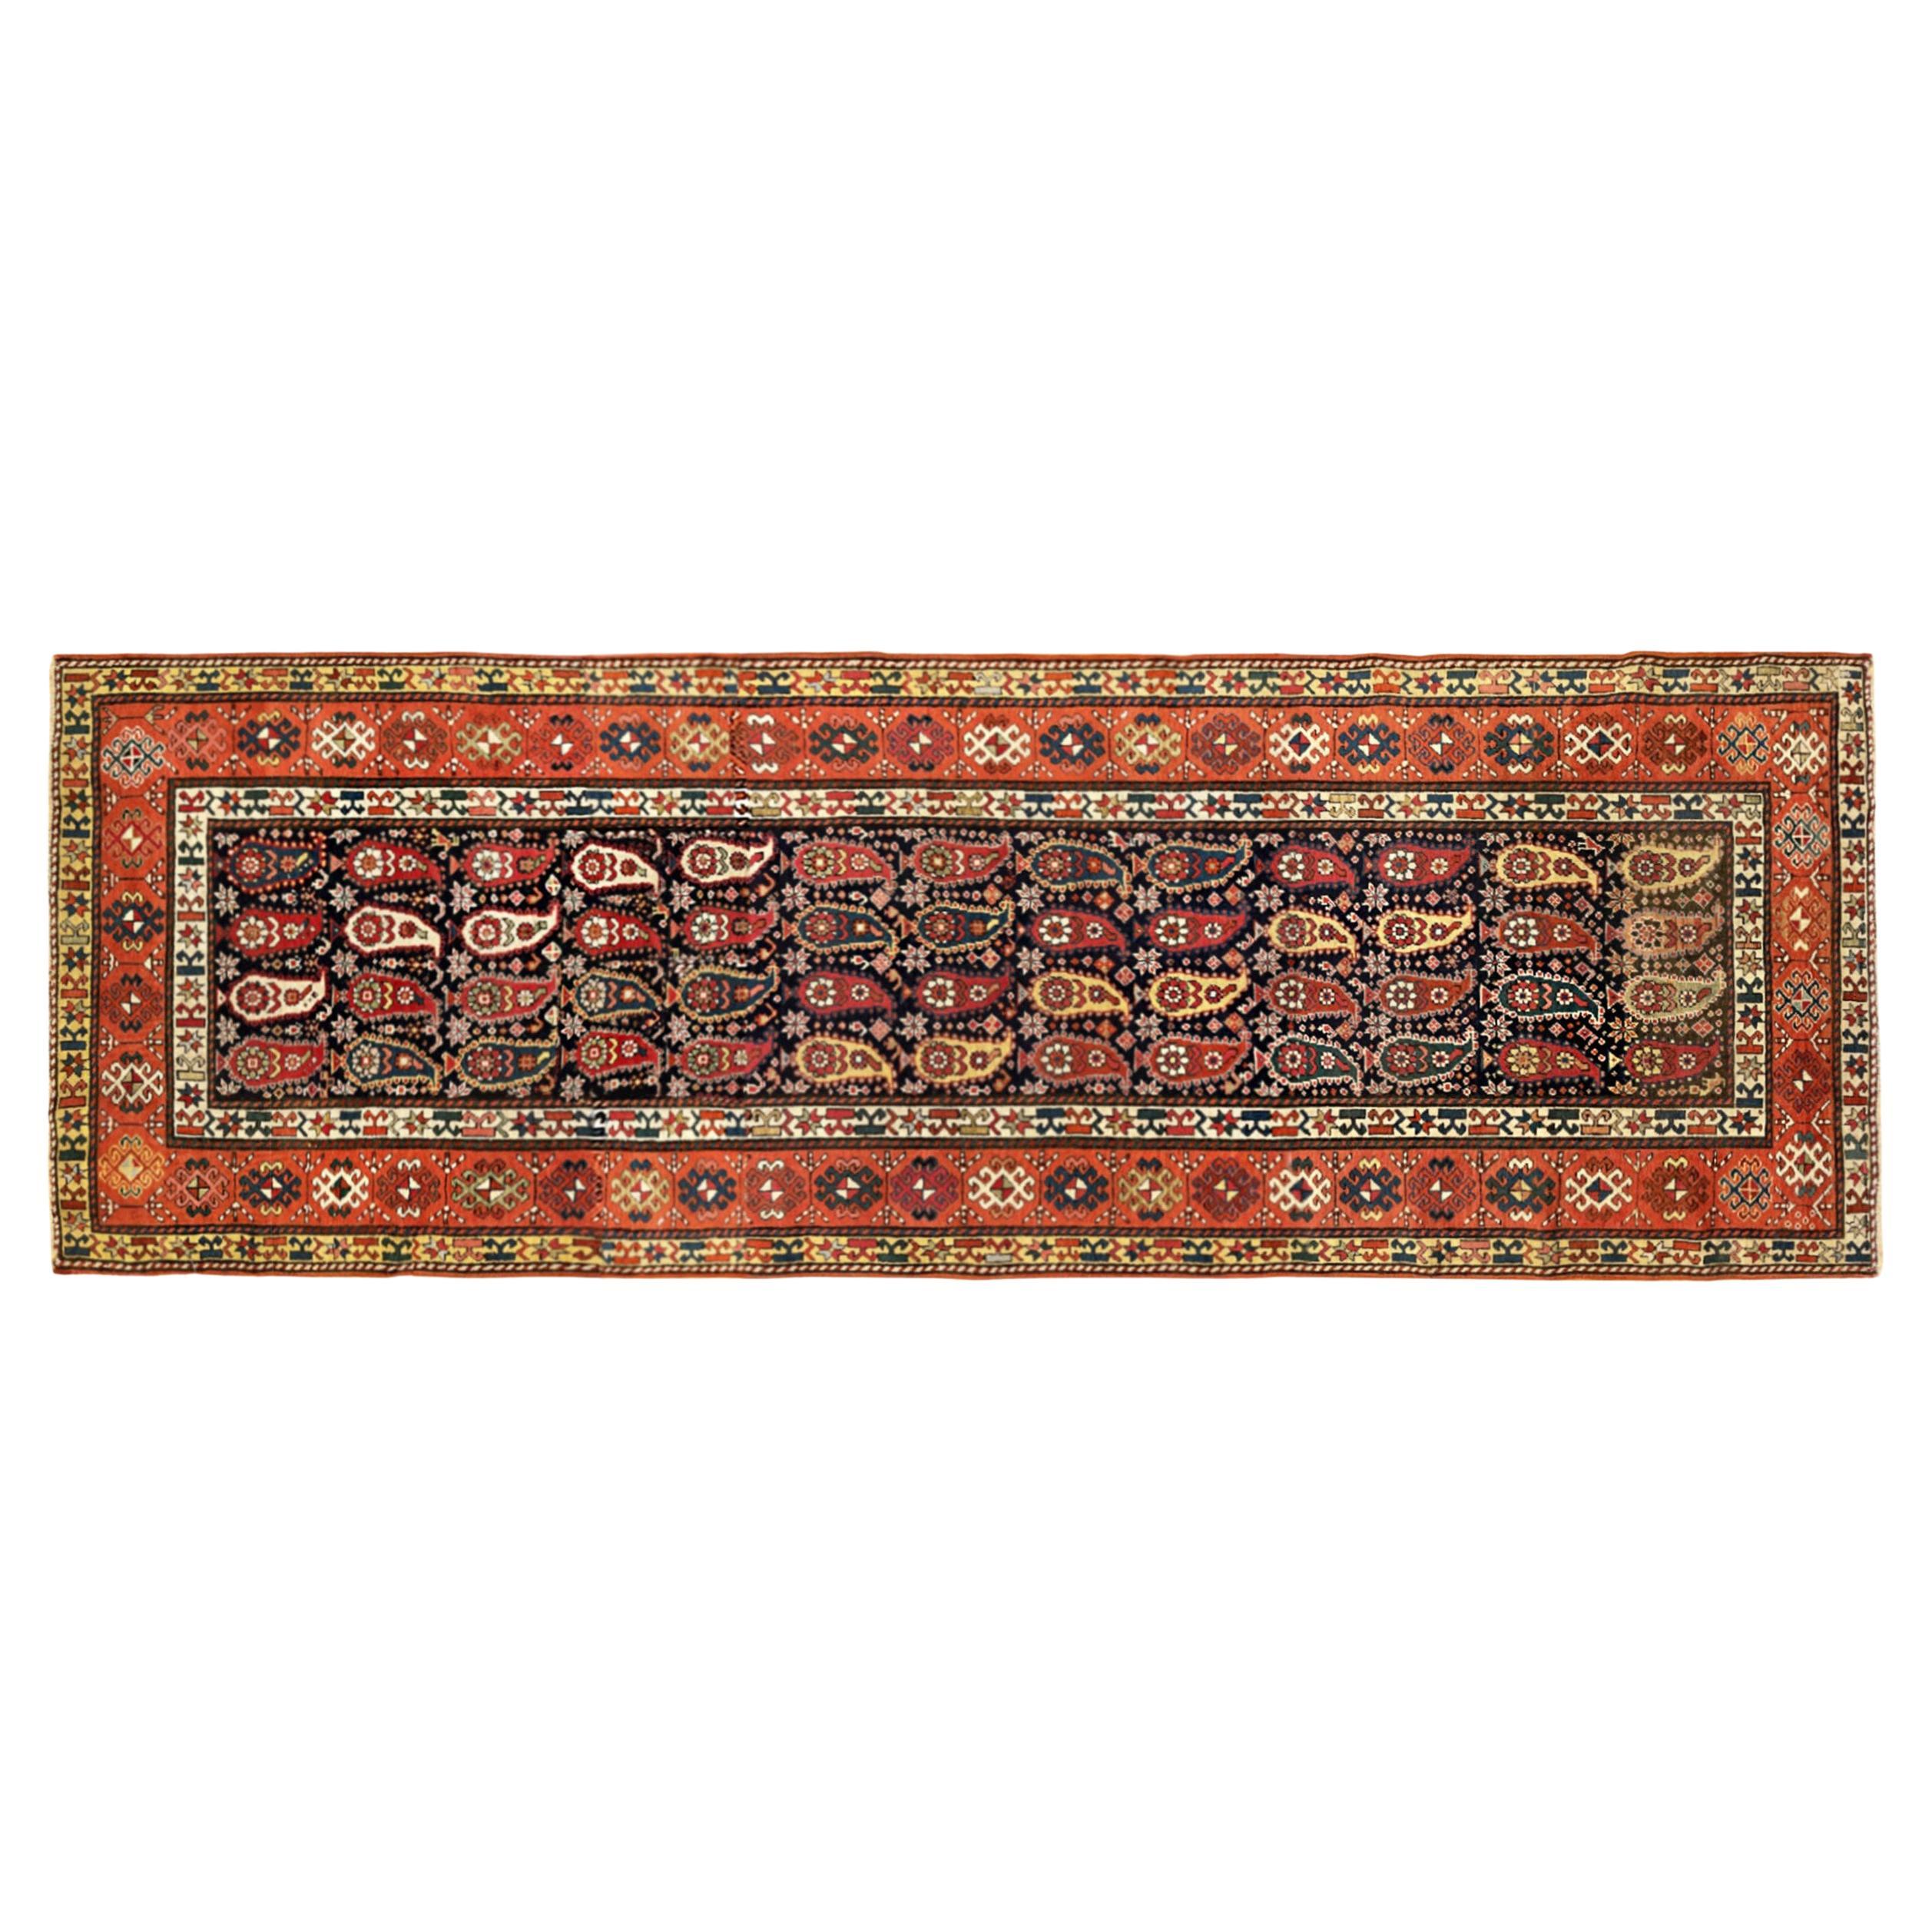 Antique Caucasian Shirvan Oriental Rug in Runner Size with Paisley Design For Sale